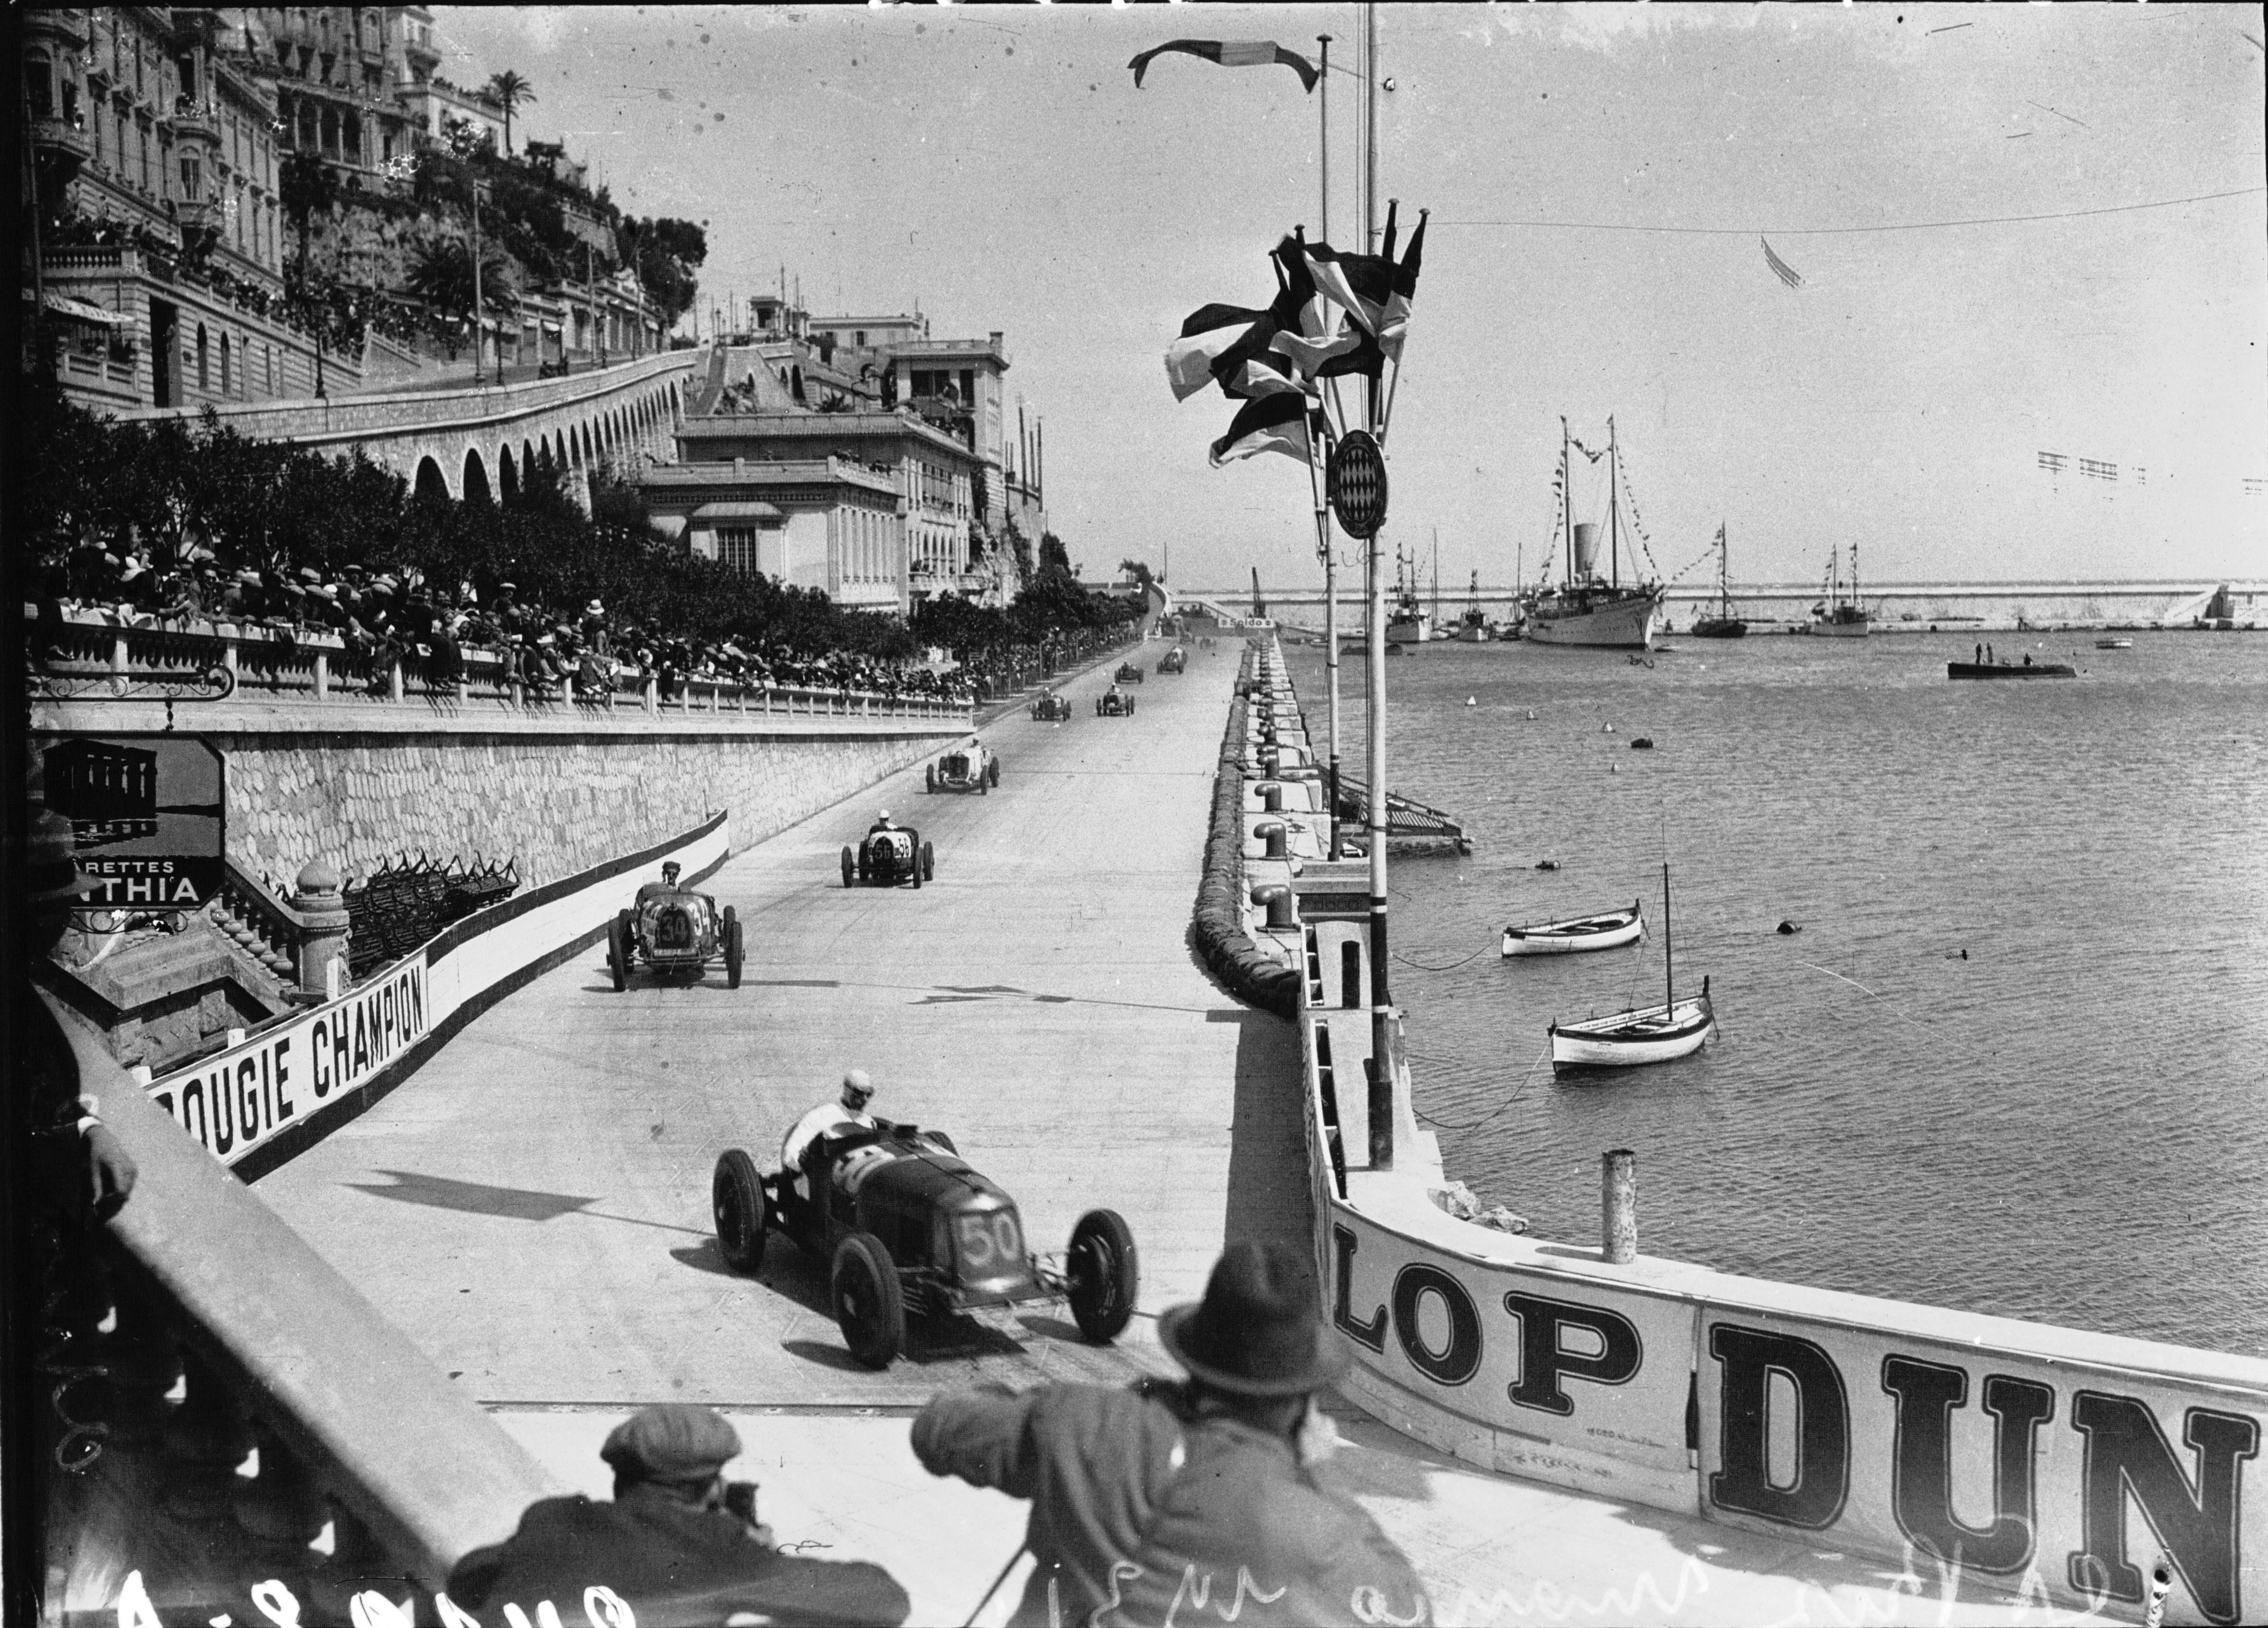 After_the_start_of_the_1931_Monaco_Grand_Prix.jpg